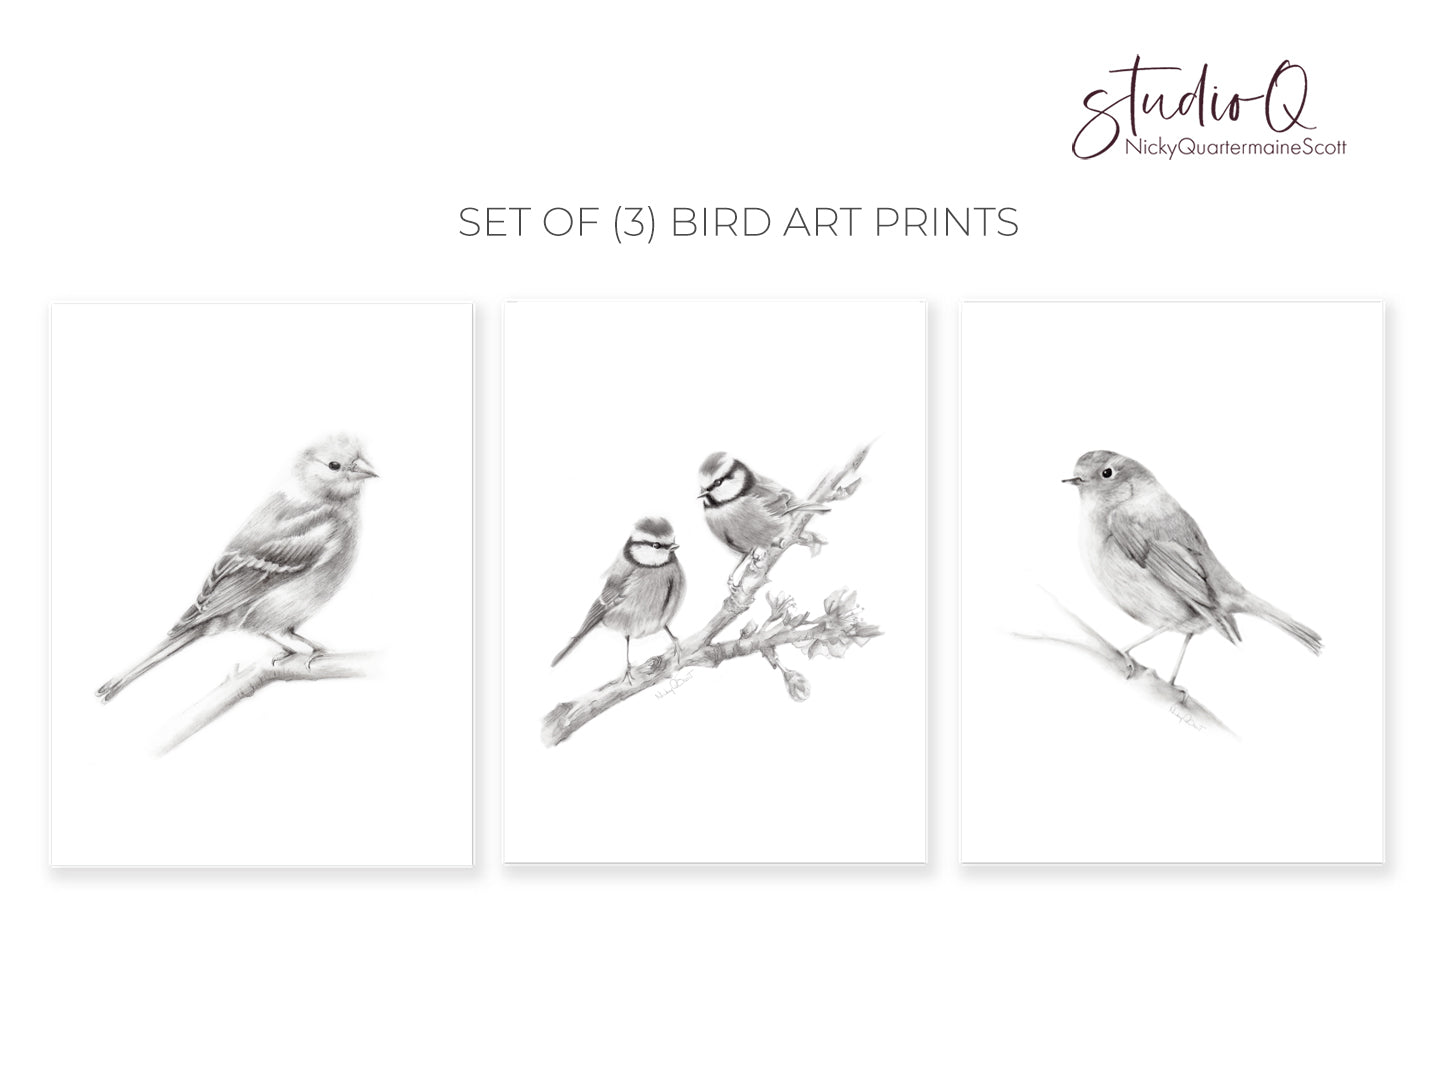 Set of Three Grey bird pencil drawing prints including a chaffinch, robin redbreast and a pair of blue tit birds sitting on a branch. Art by Nicky Quartermaine Scott for Studio Q